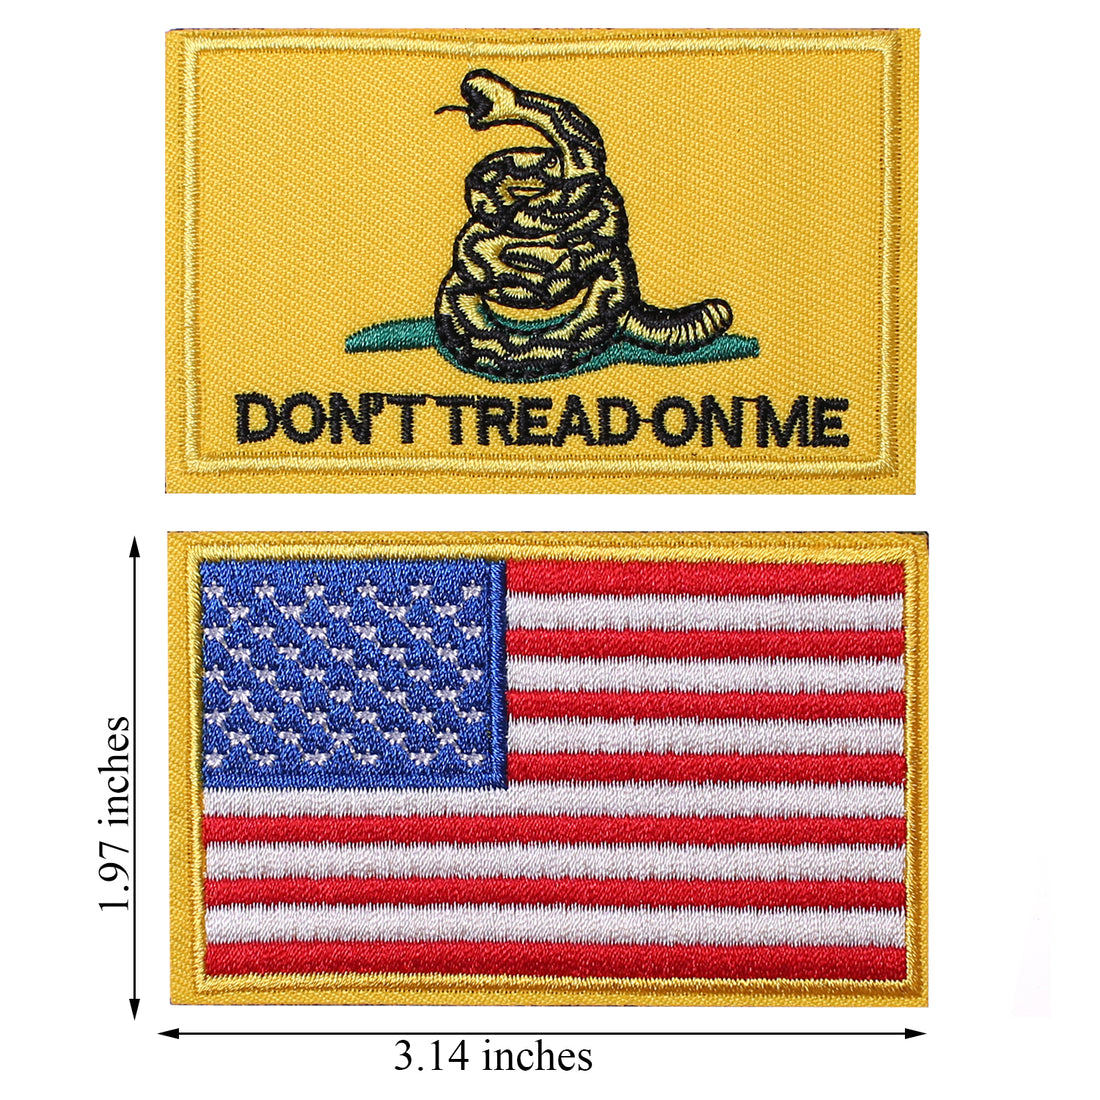 USA Flag Patch 2x3 Inch Don't tread on me Patch American Flag Tactical Military Morale Patch Border USA United States for Uniform Emblem 2 Pcs.